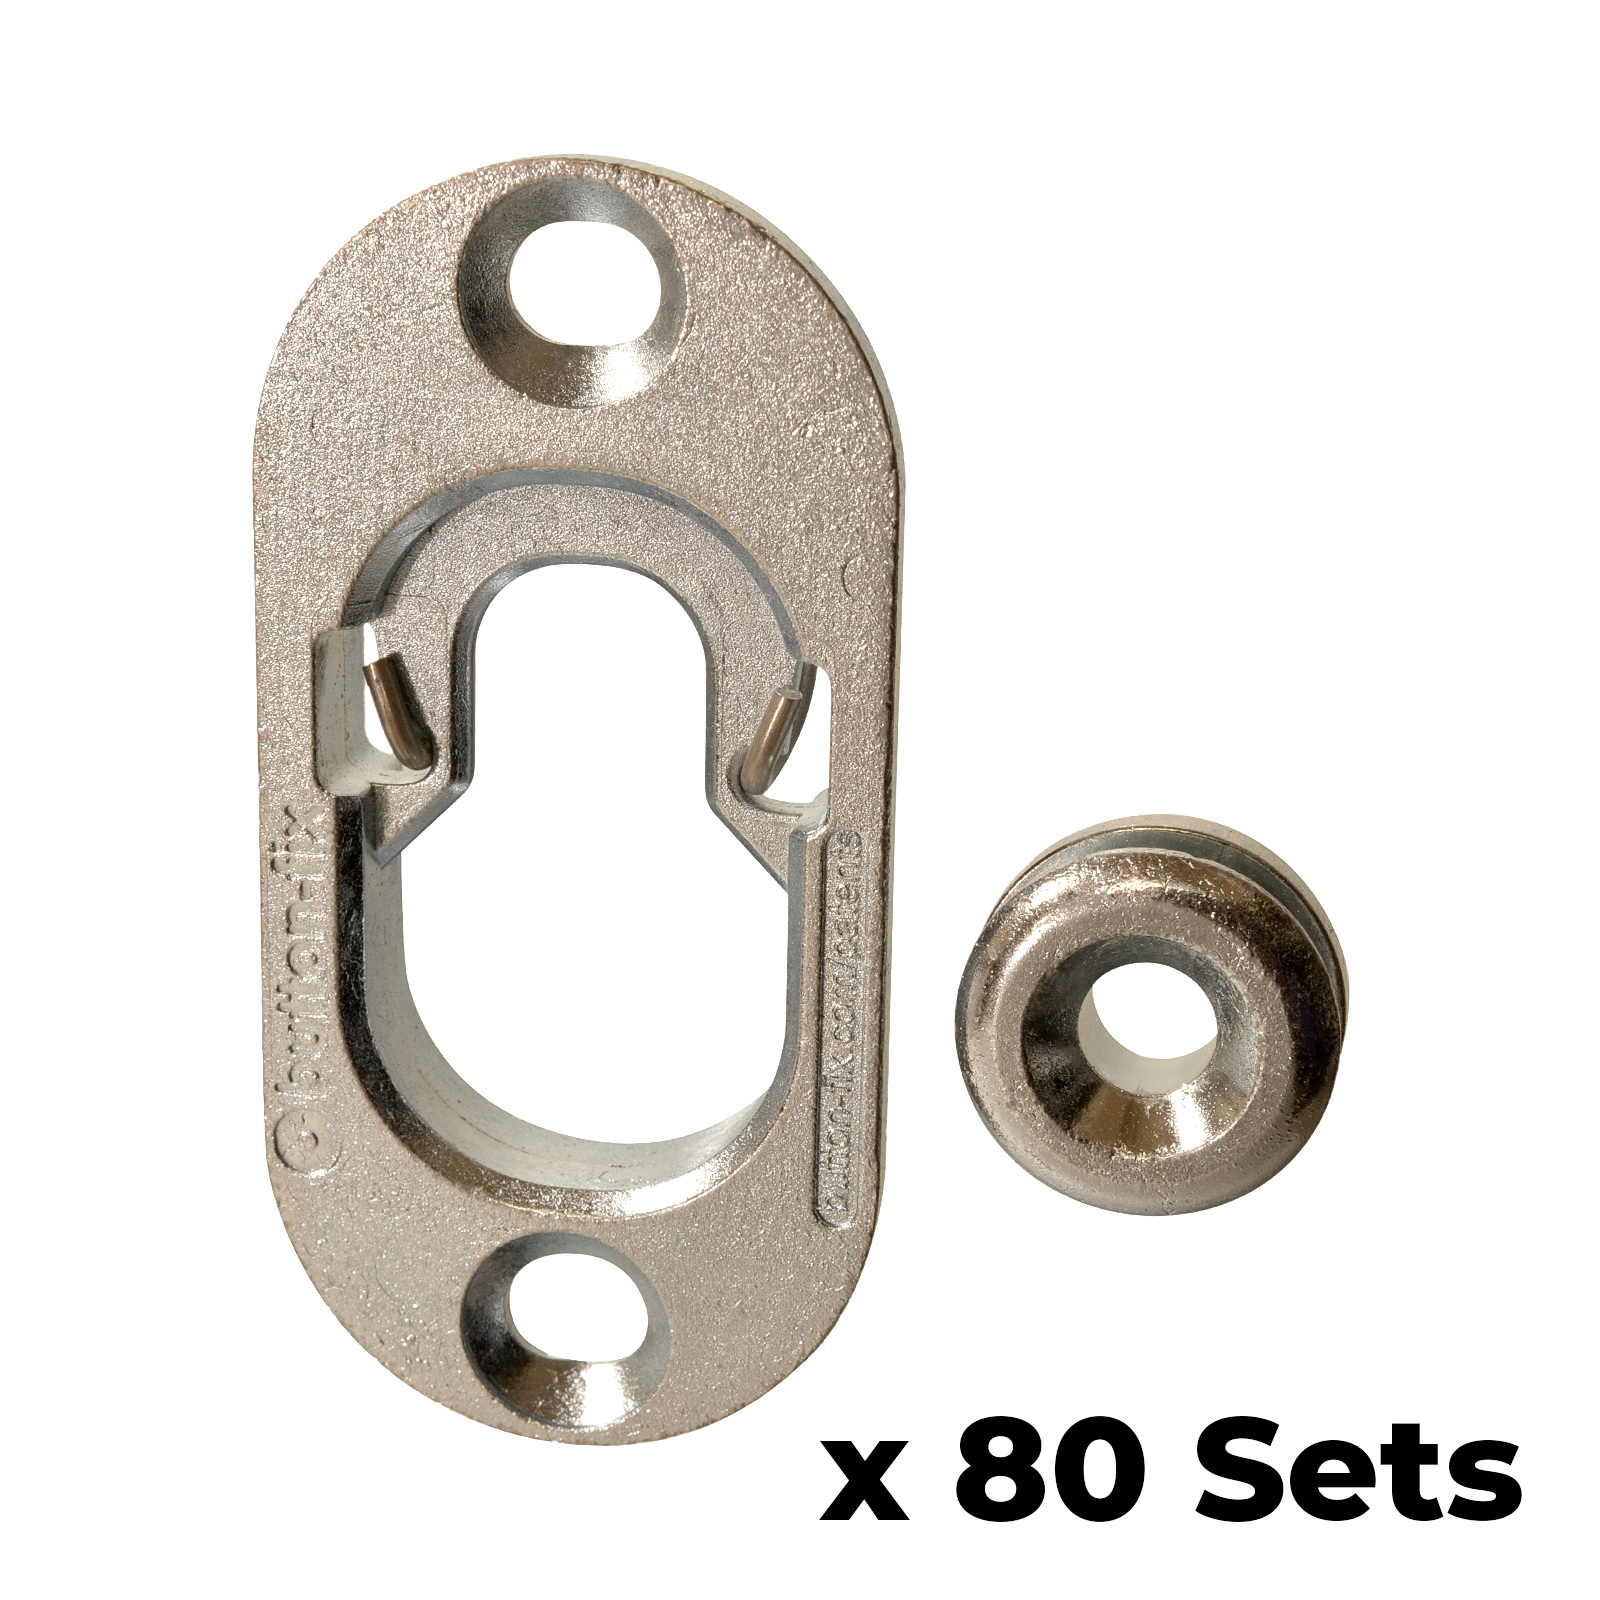 Button Fix Type 1 Metal Fix Bracket Fixing with Stainless Steel Retaining Spring for Fire Retardant Panels, Marine Interiors, Vibration & Shock Tested x80